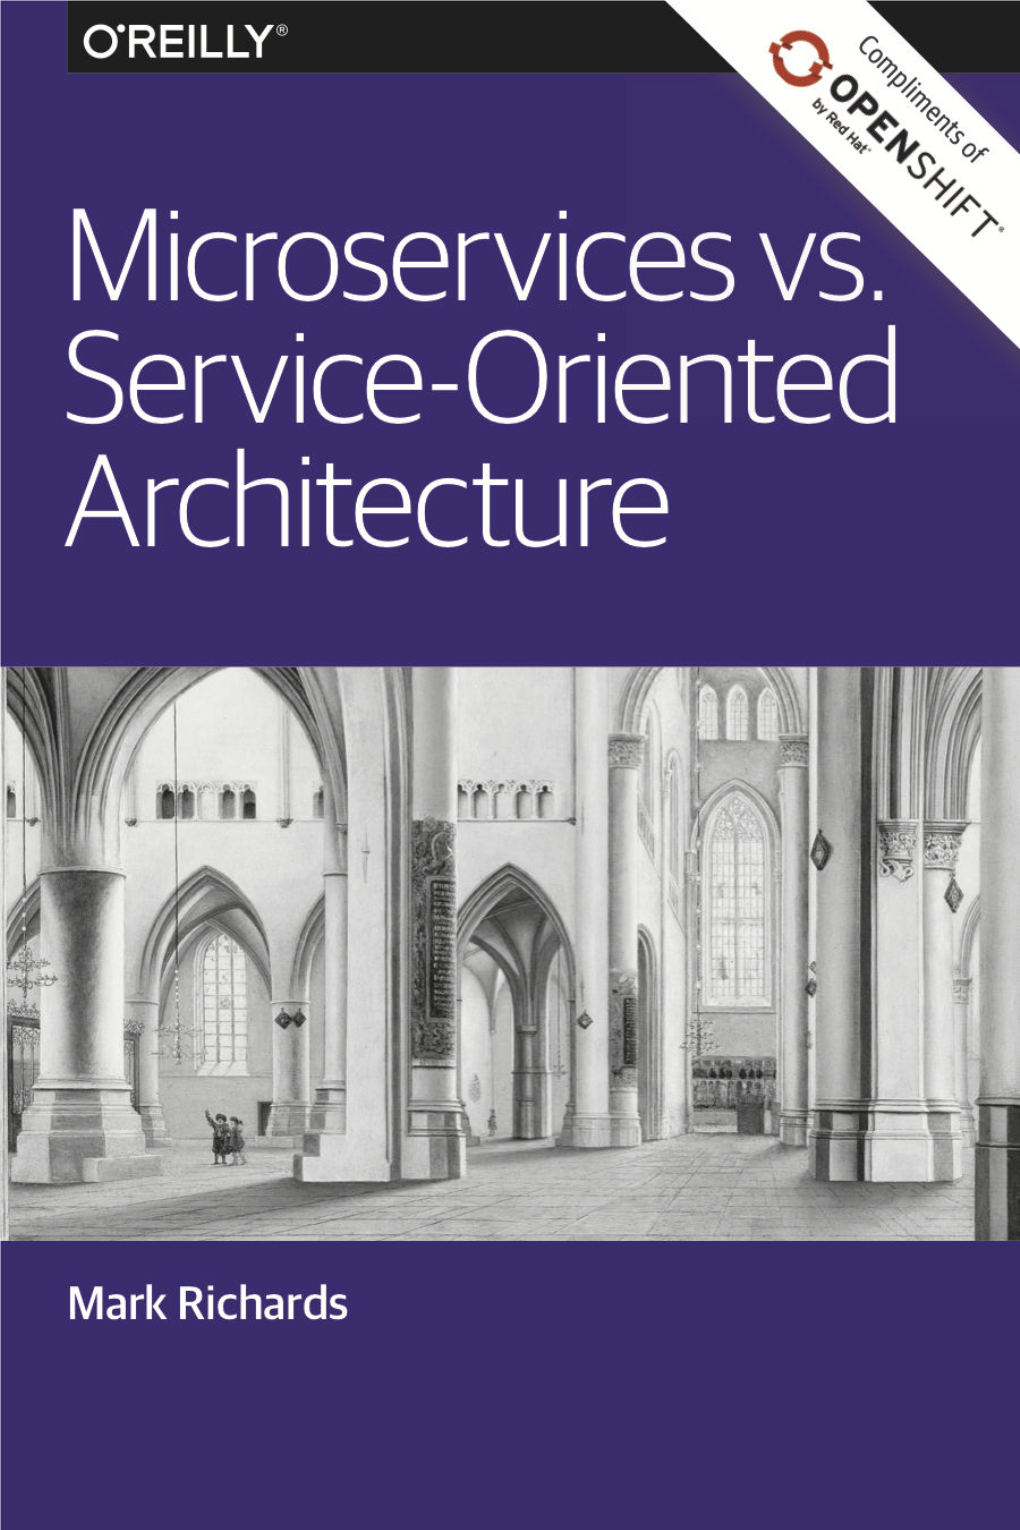 Microservices Vs. Service-Oriented Architecture by Mark Richards Copyright © 2016 O’Reilly Media